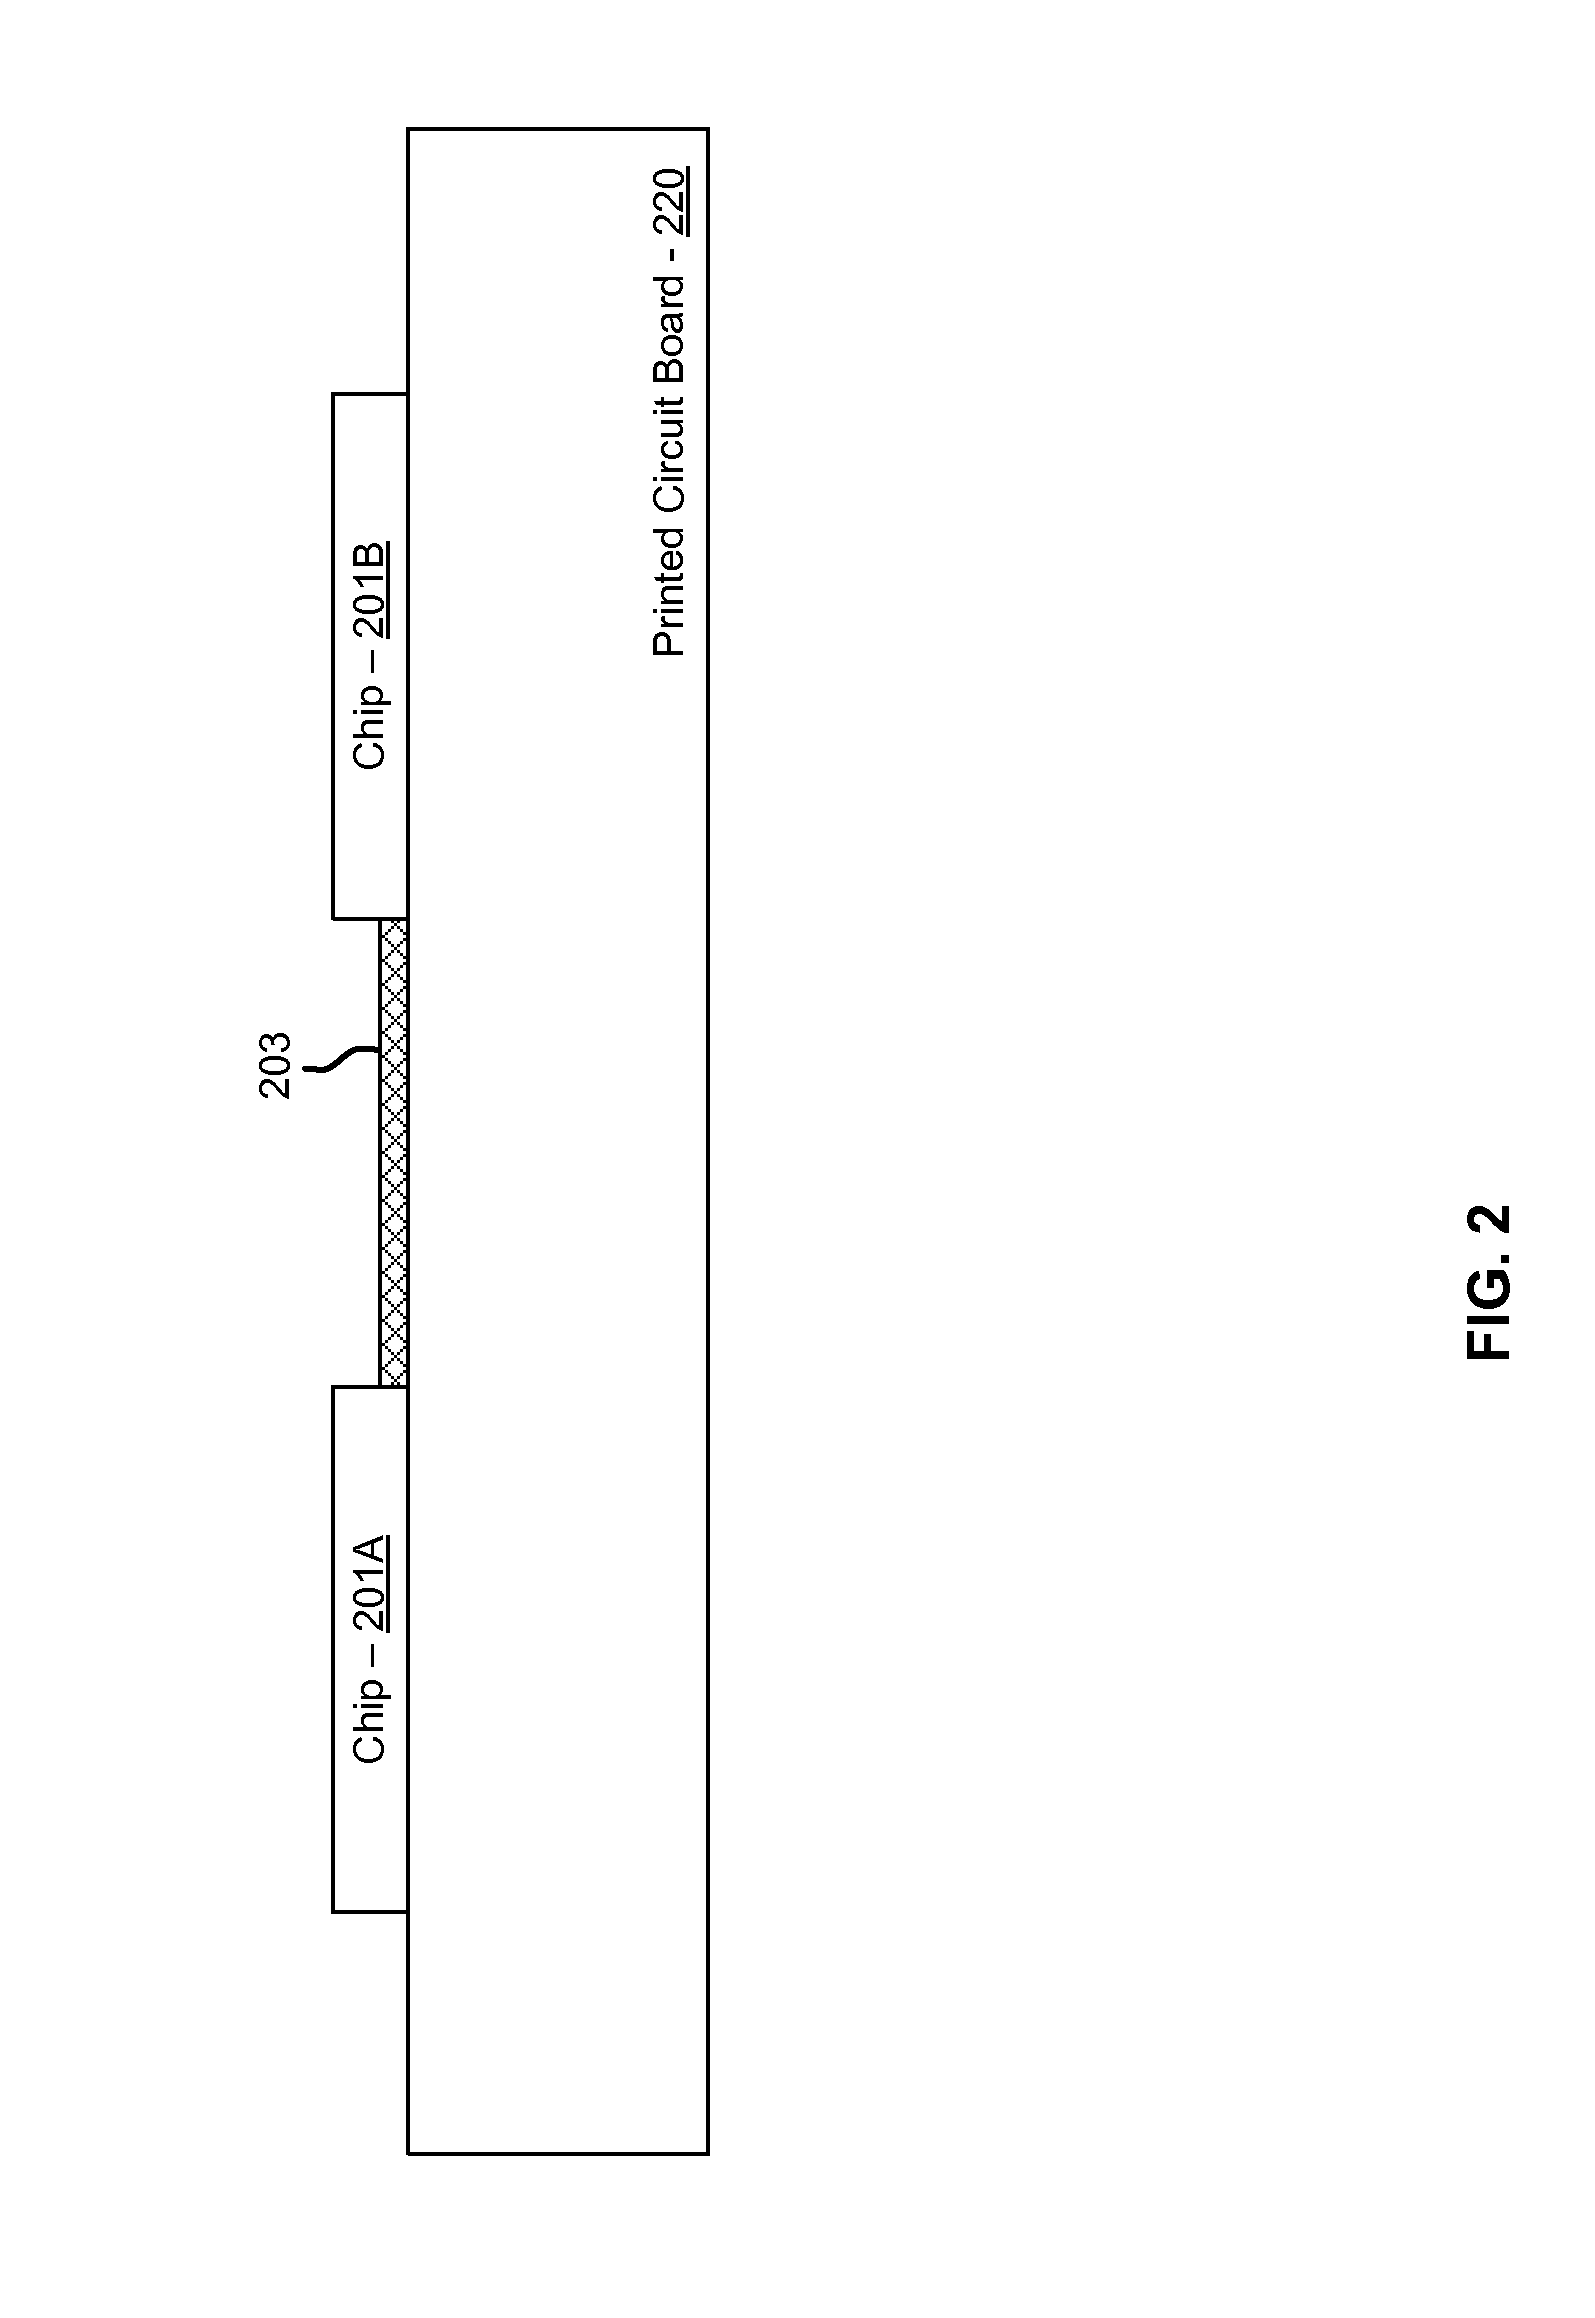 Method and system for intra-printed circuit board communication via waveguides